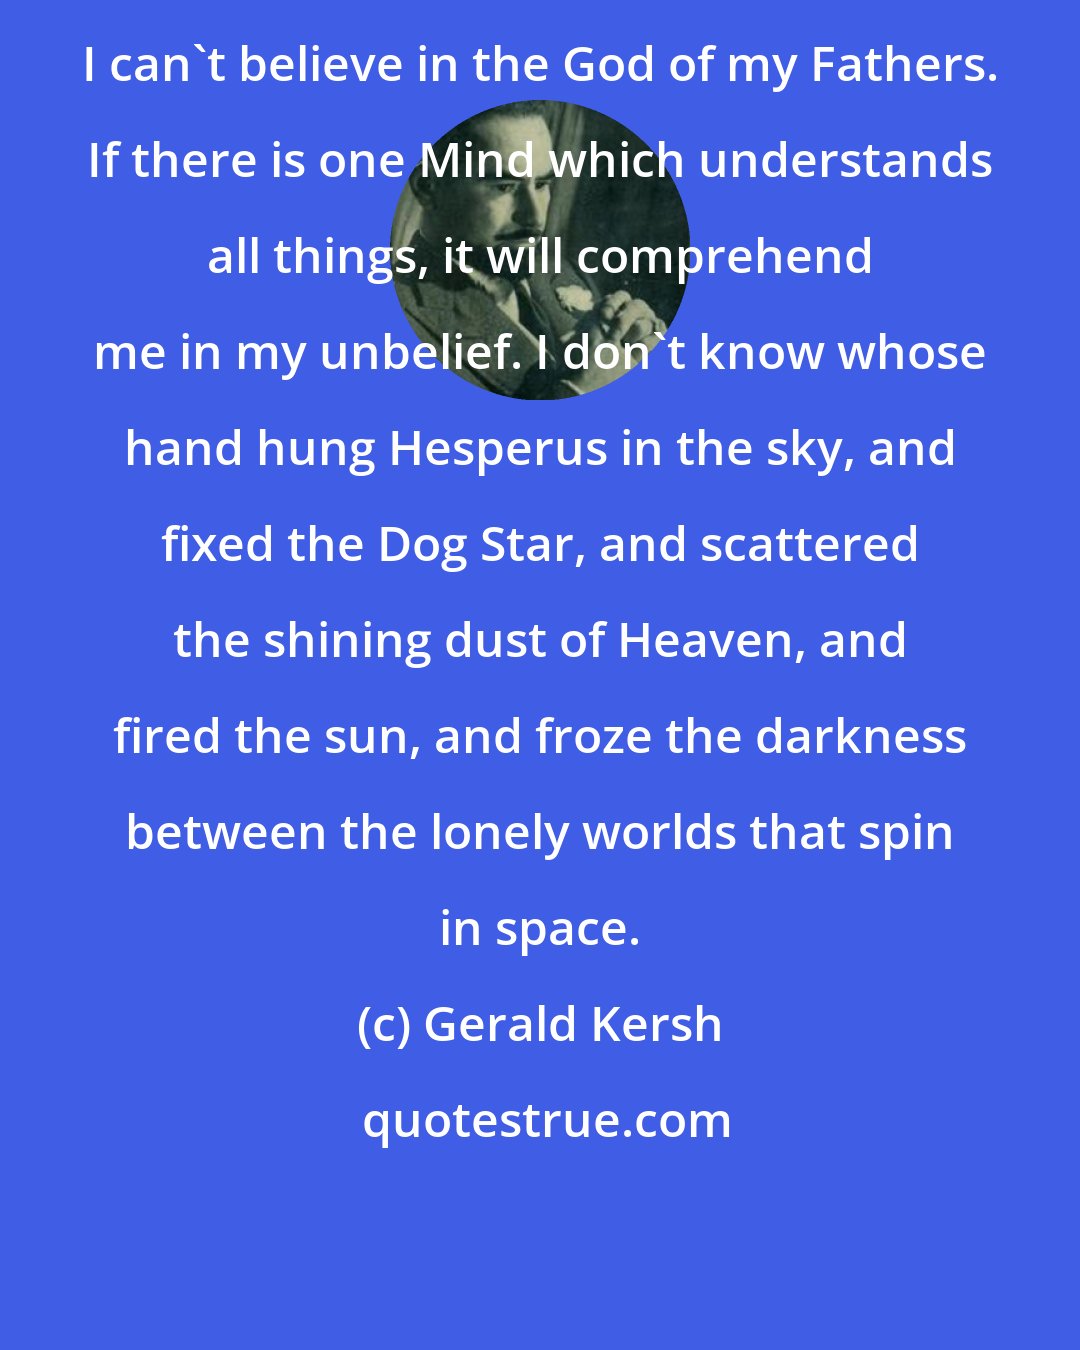 Gerald Kersh: I can't believe in the God of my Fathers. If there is one Mind which understands all things, it will comprehend me in my unbelief. I don't know whose hand hung Hesperus in the sky, and fixed the Dog Star, and scattered the shining dust of Heaven, and fired the sun, and froze the darkness between the lonely worlds that spin in space.